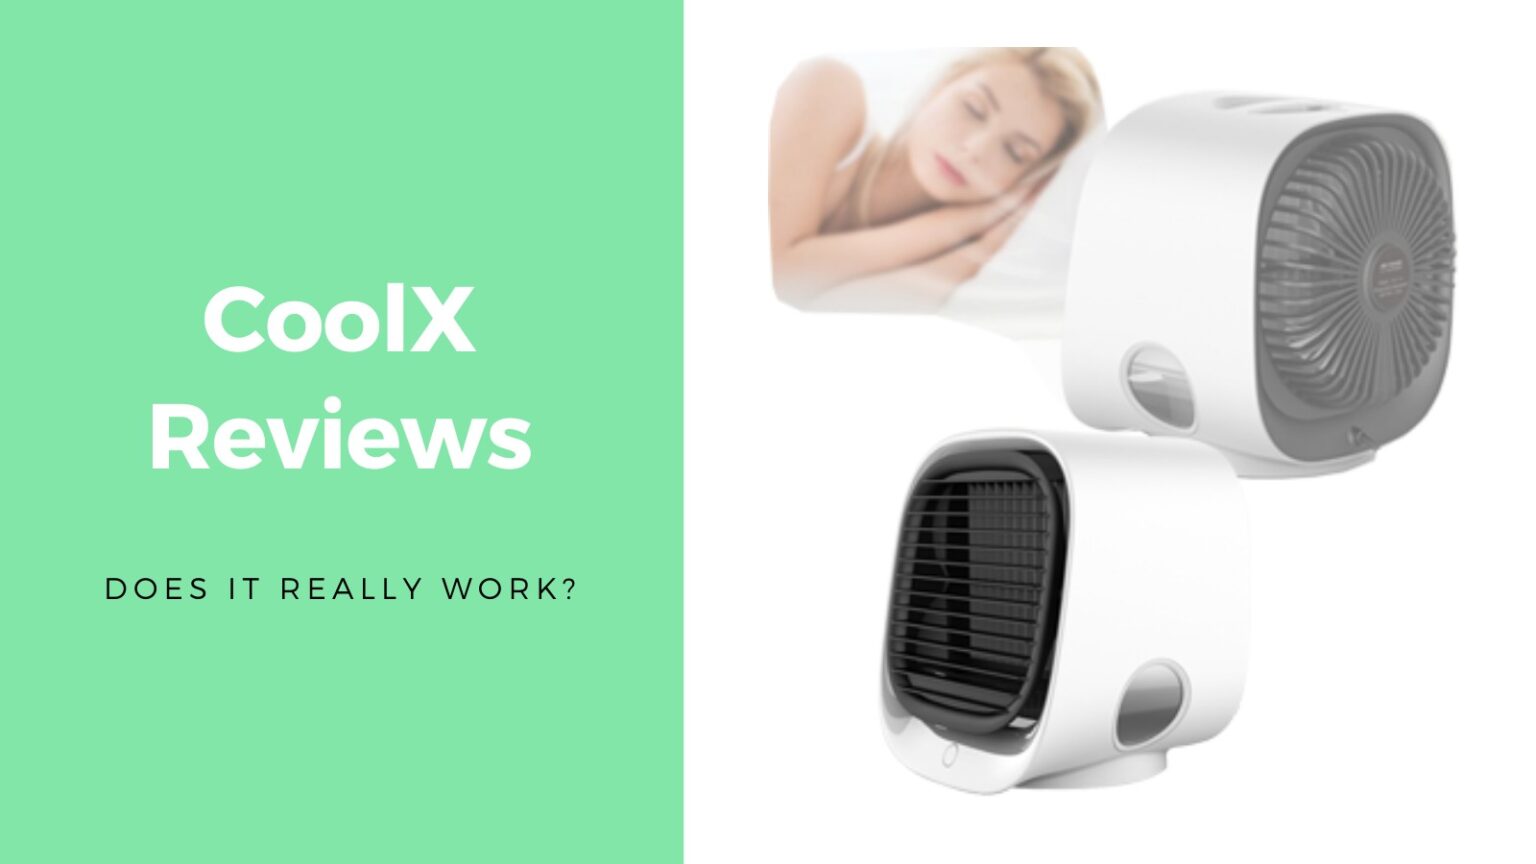 CoolX is a portable air conditioner unit that can fit anywhere. Find out whether it's right for you with these reviews.